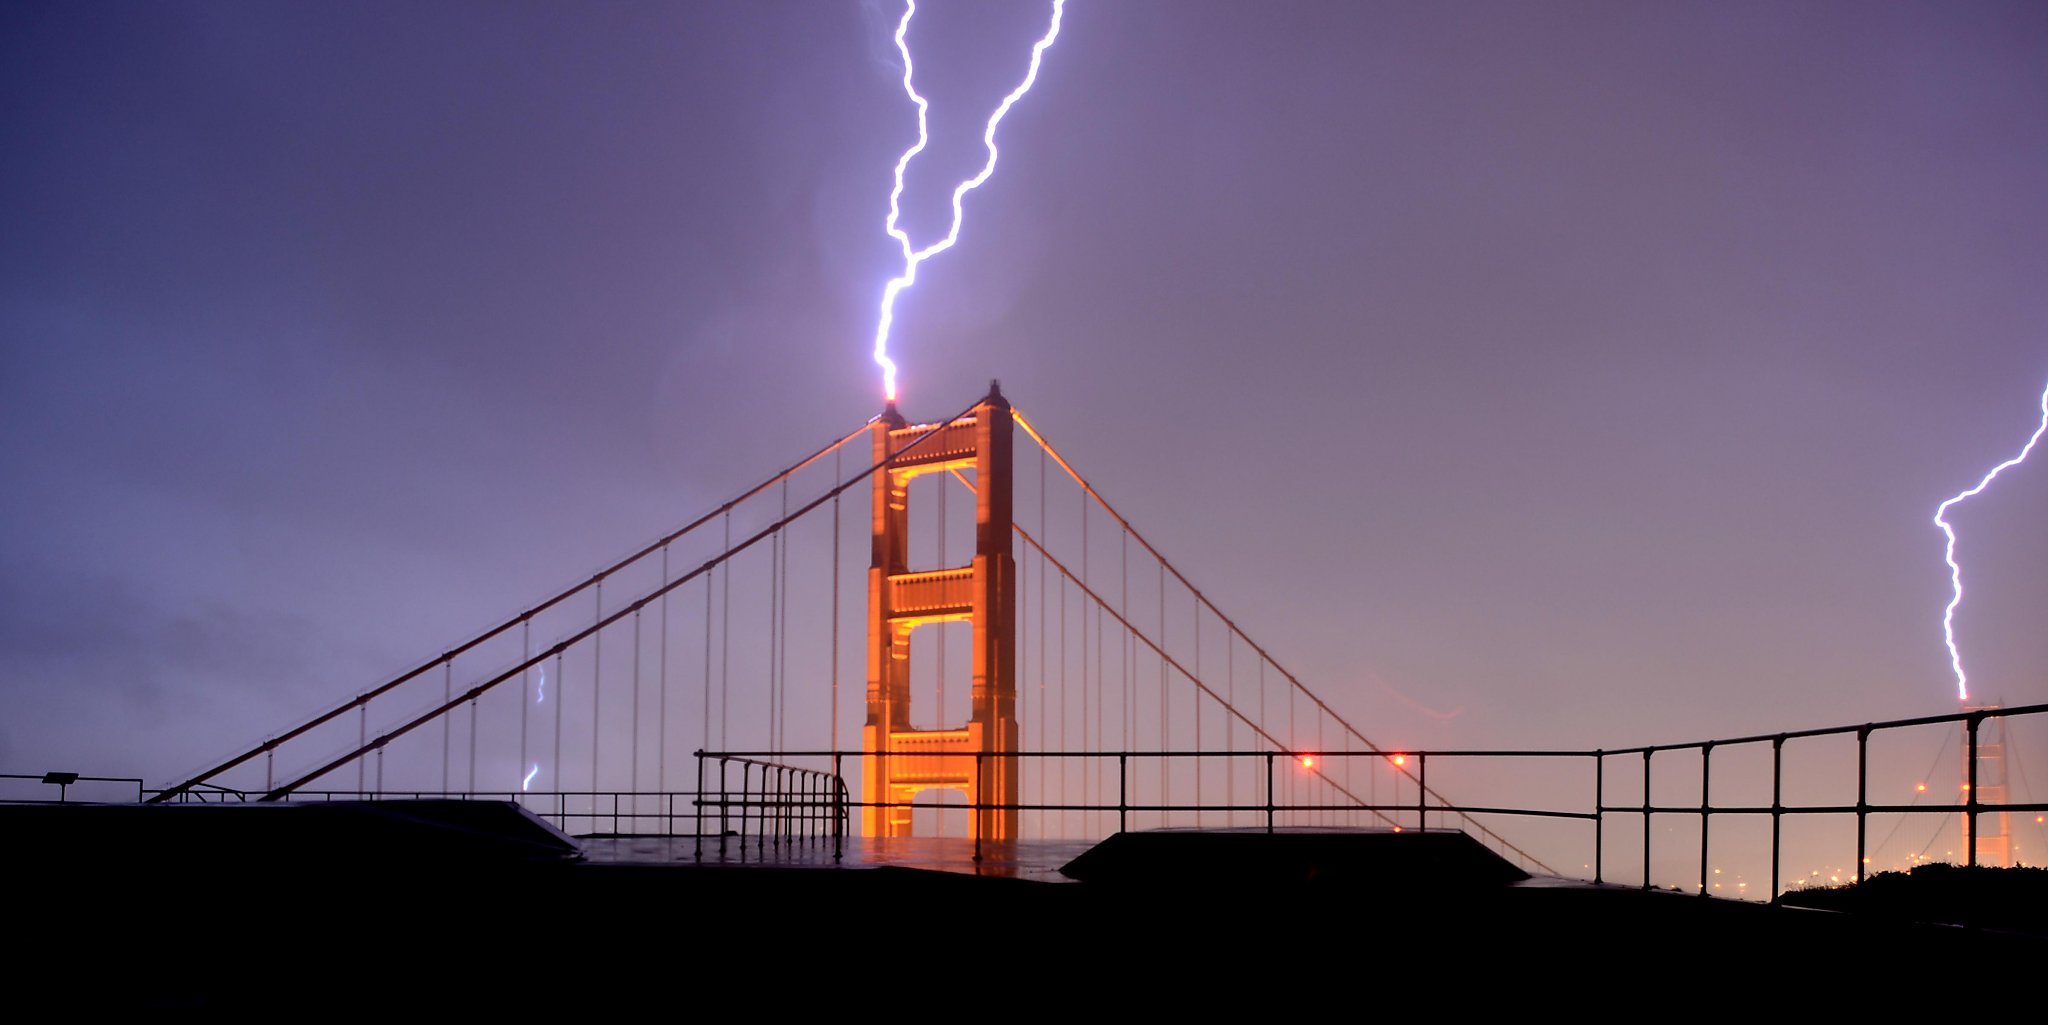 Lightning Storm over the South San Francisco Bay